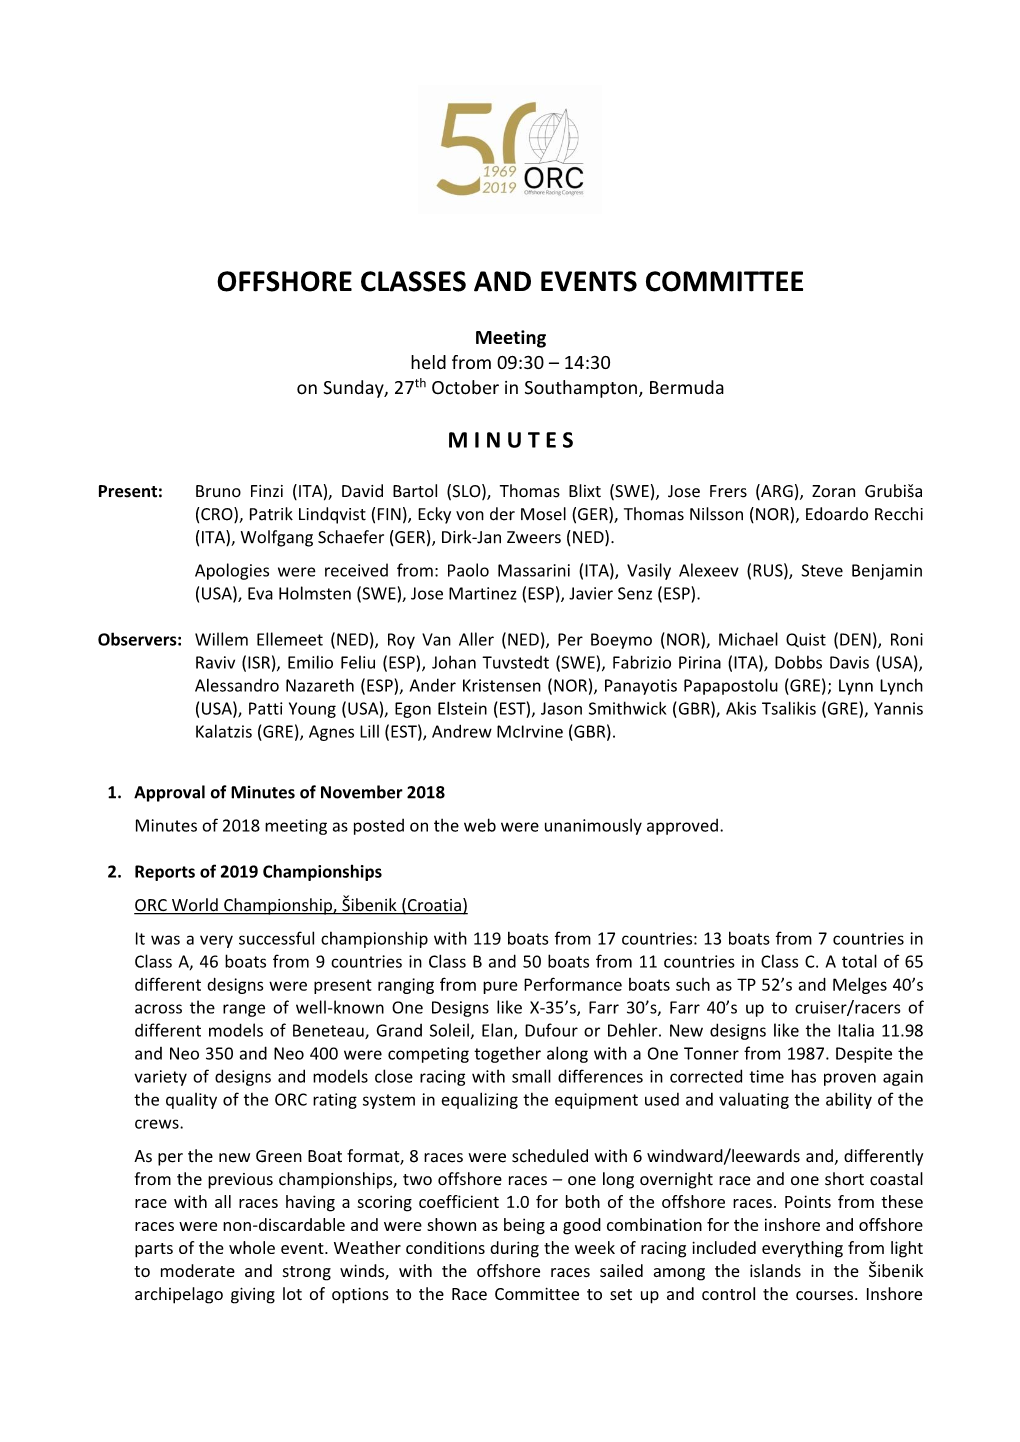 Offshore Classes and Events Committee